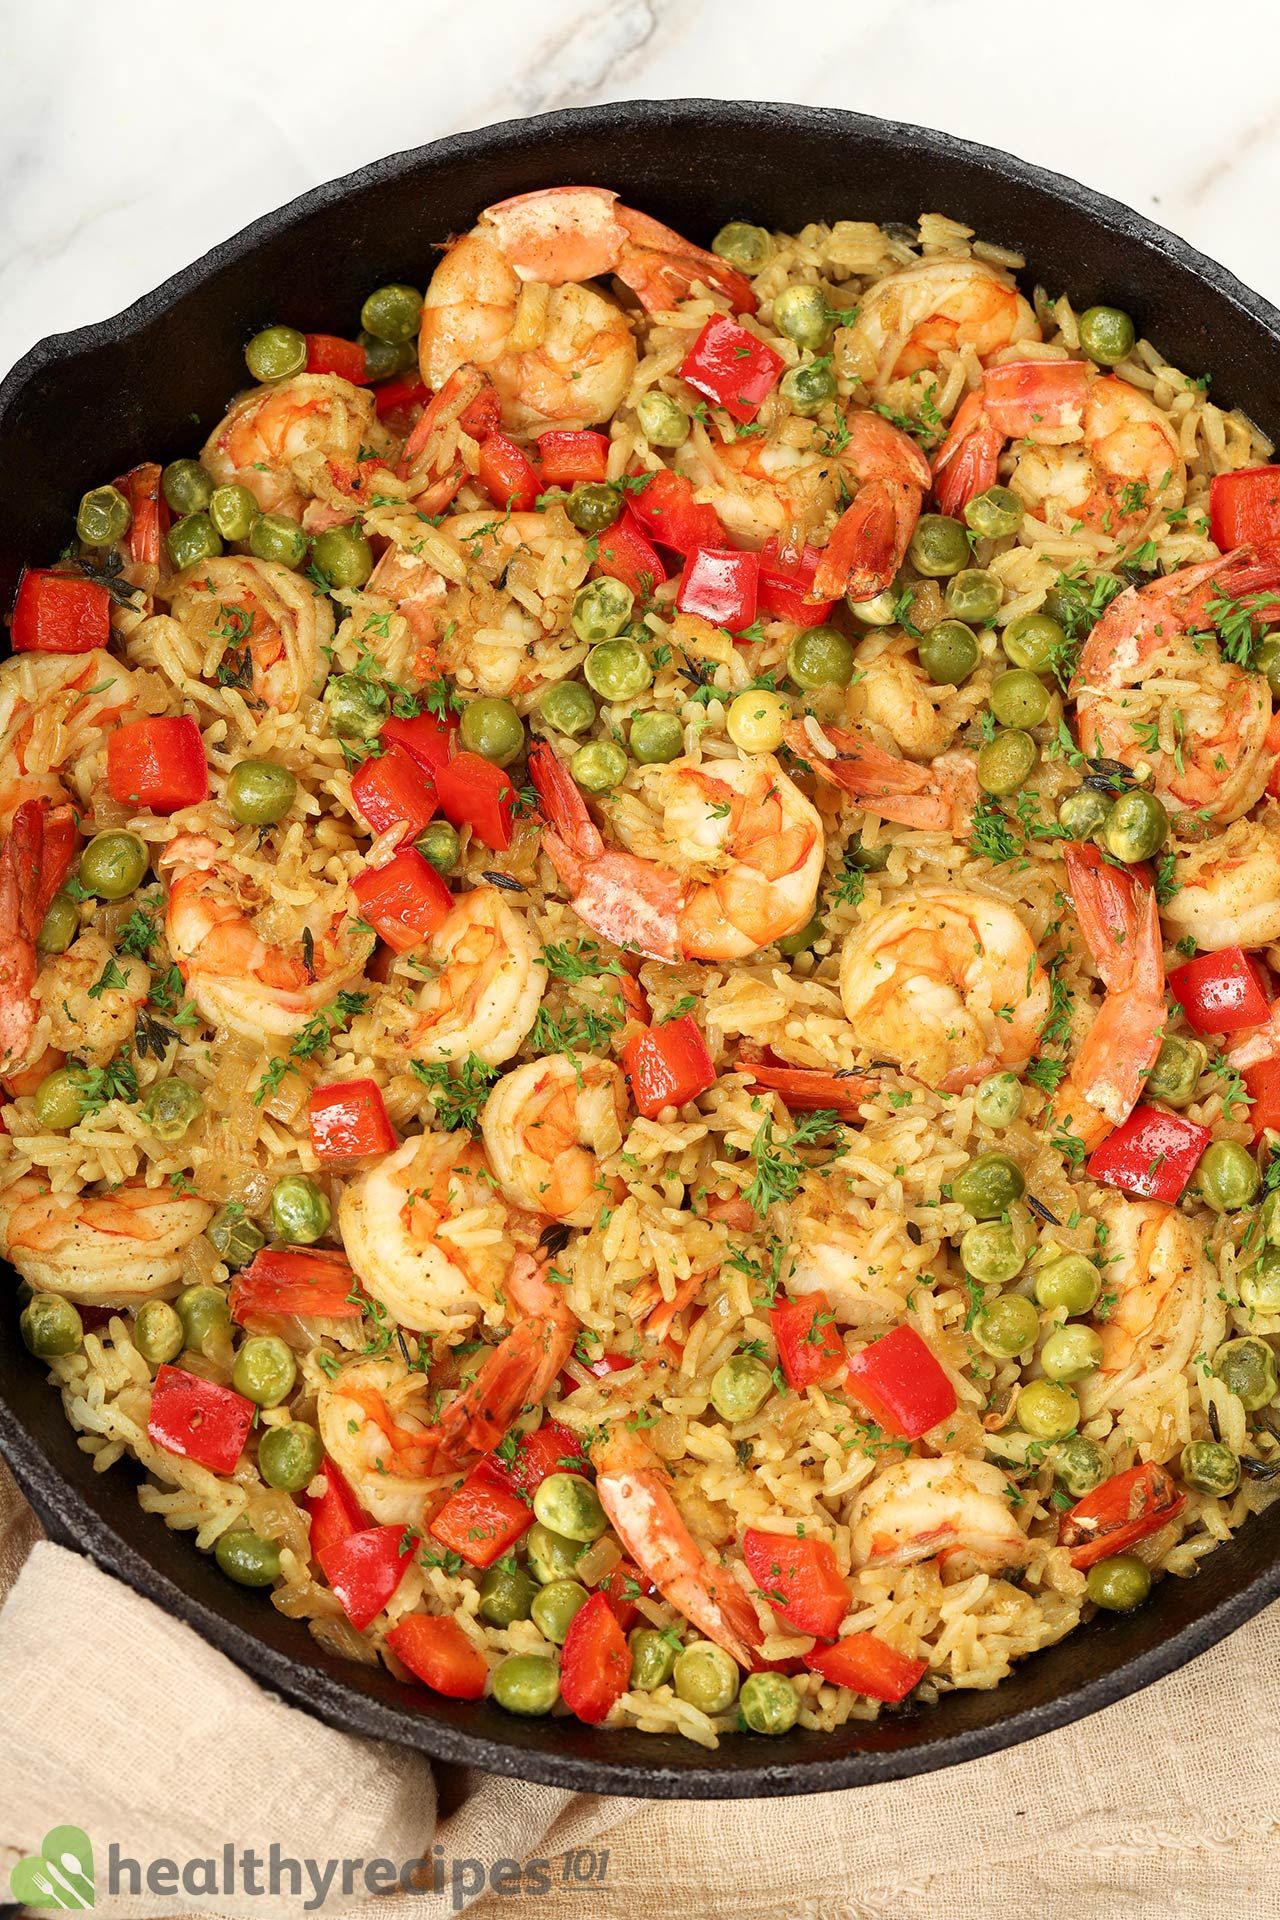 What Are the Three Main Types of Paella